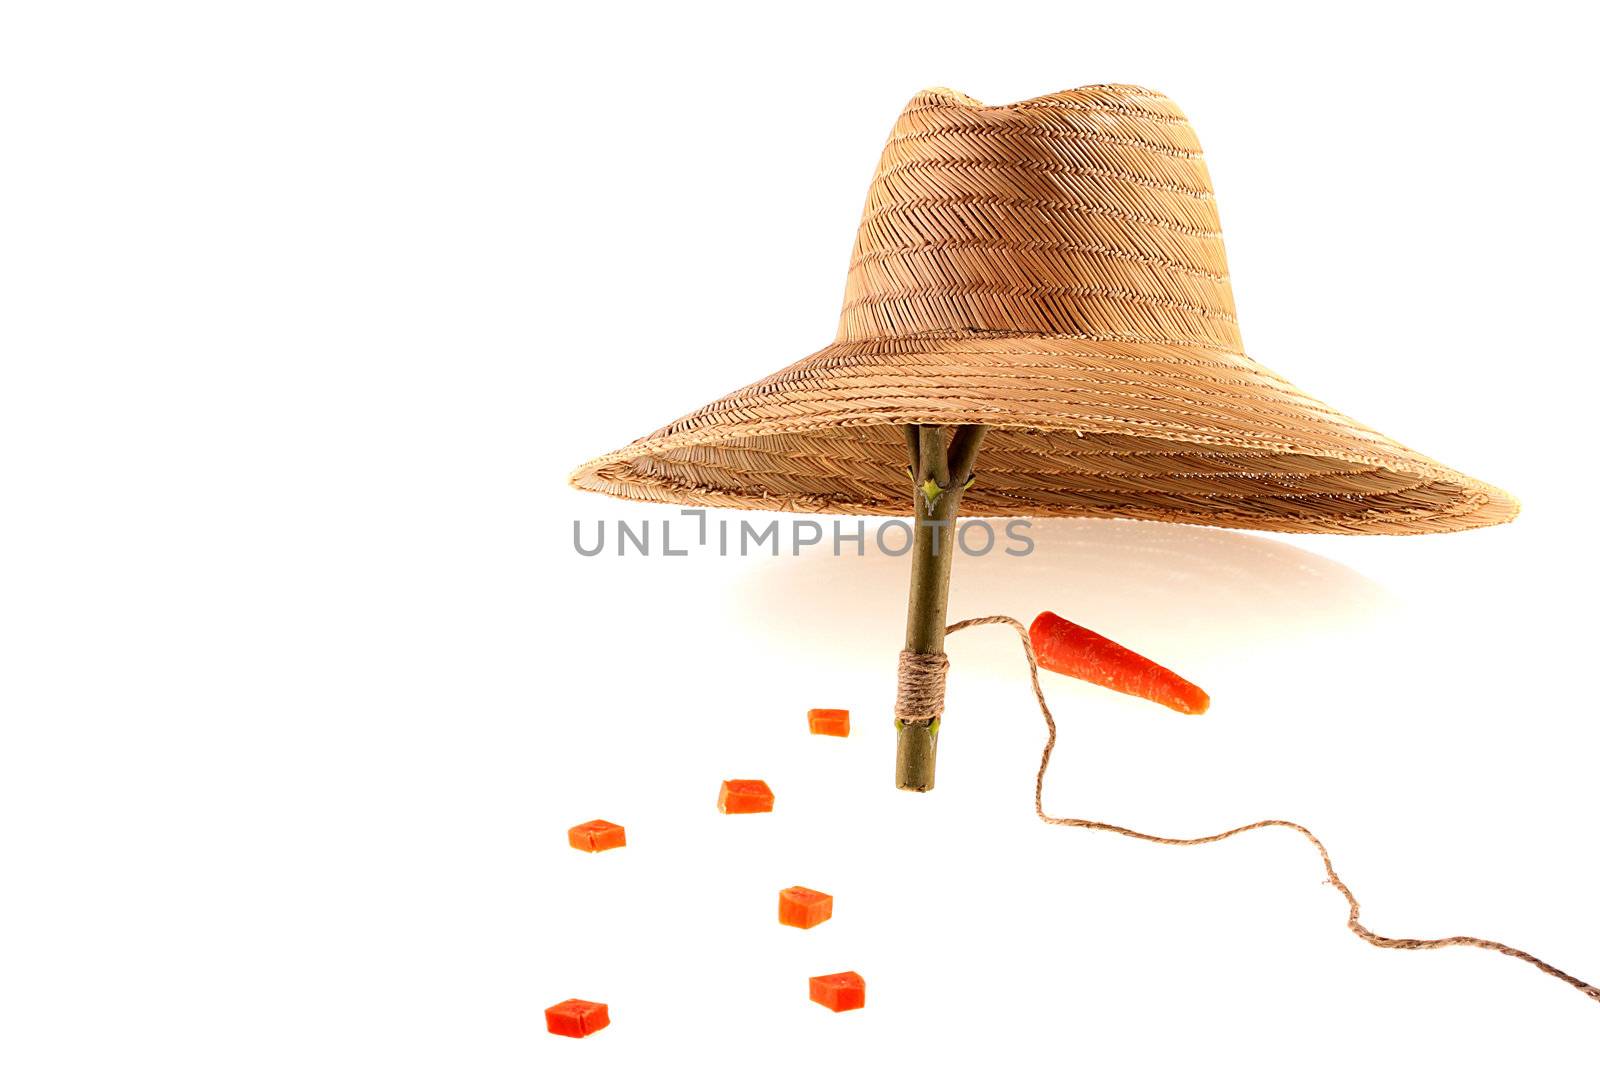 The trap is made of a straw hat, as a bait a carrot.